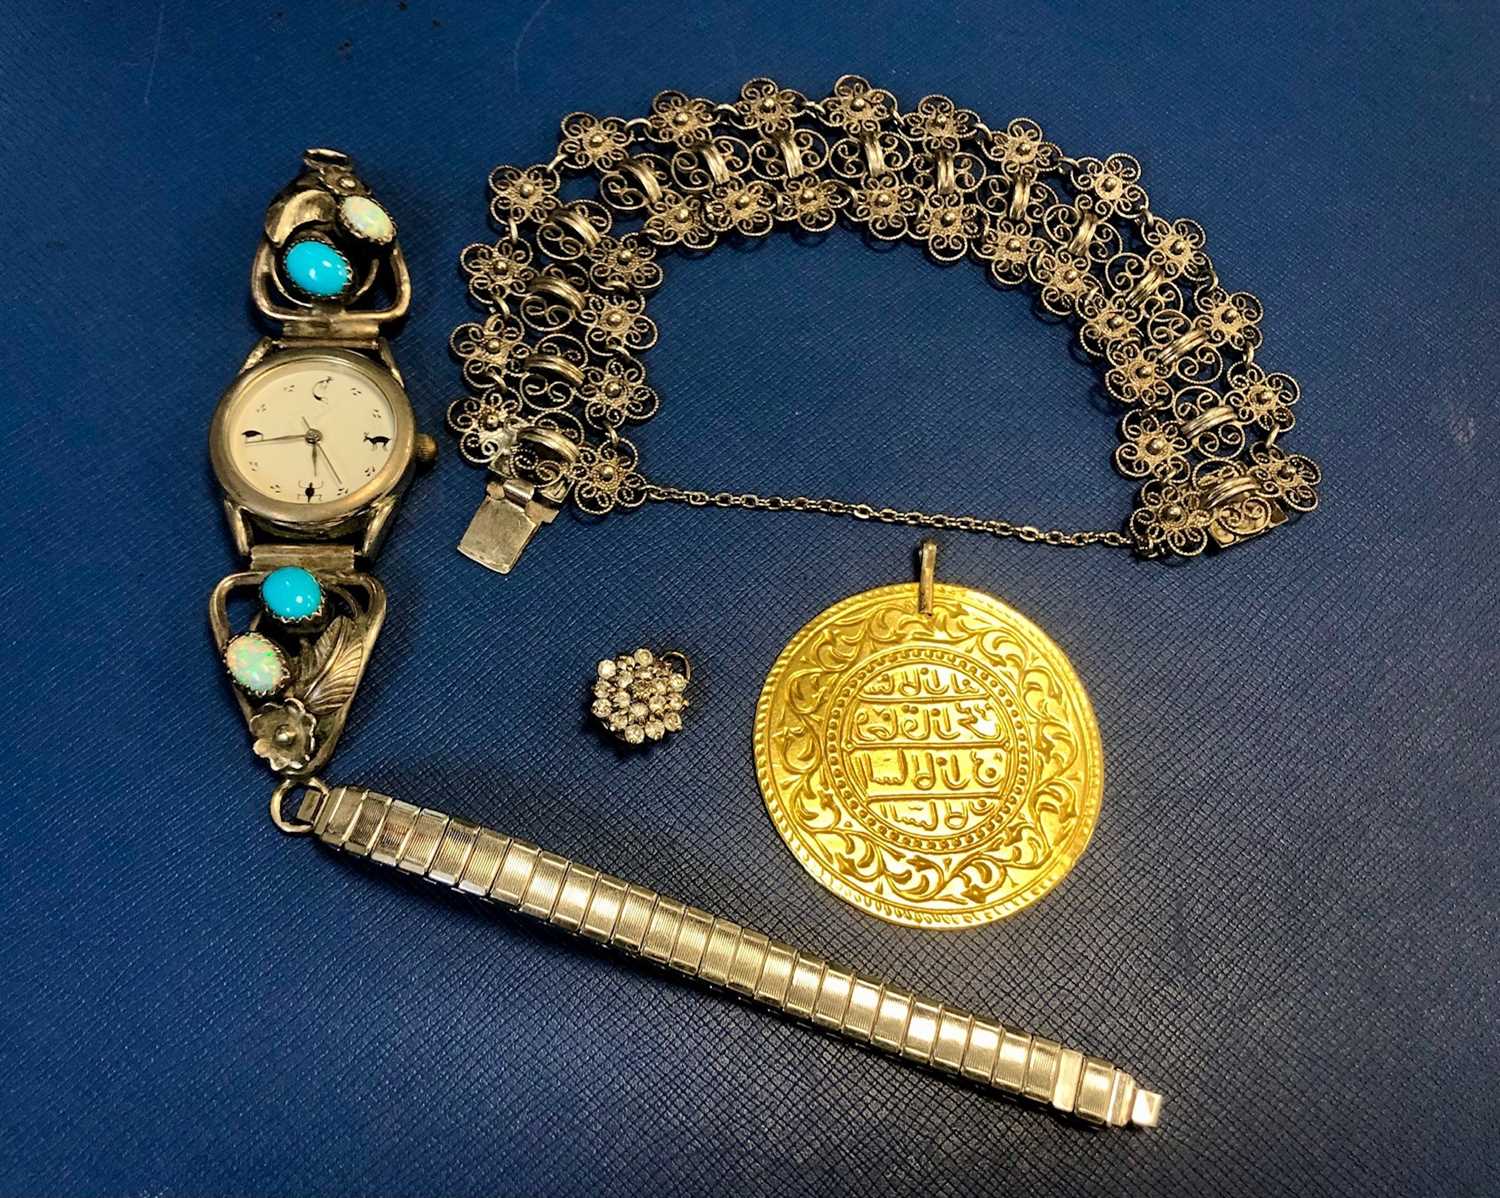 Lot 20 - A SILVER FILIGREE BRACELET, SILVER AND STONE SET WRIST WATCH, A MEDALLION AND A STONE SET CLUSTER PENDANT